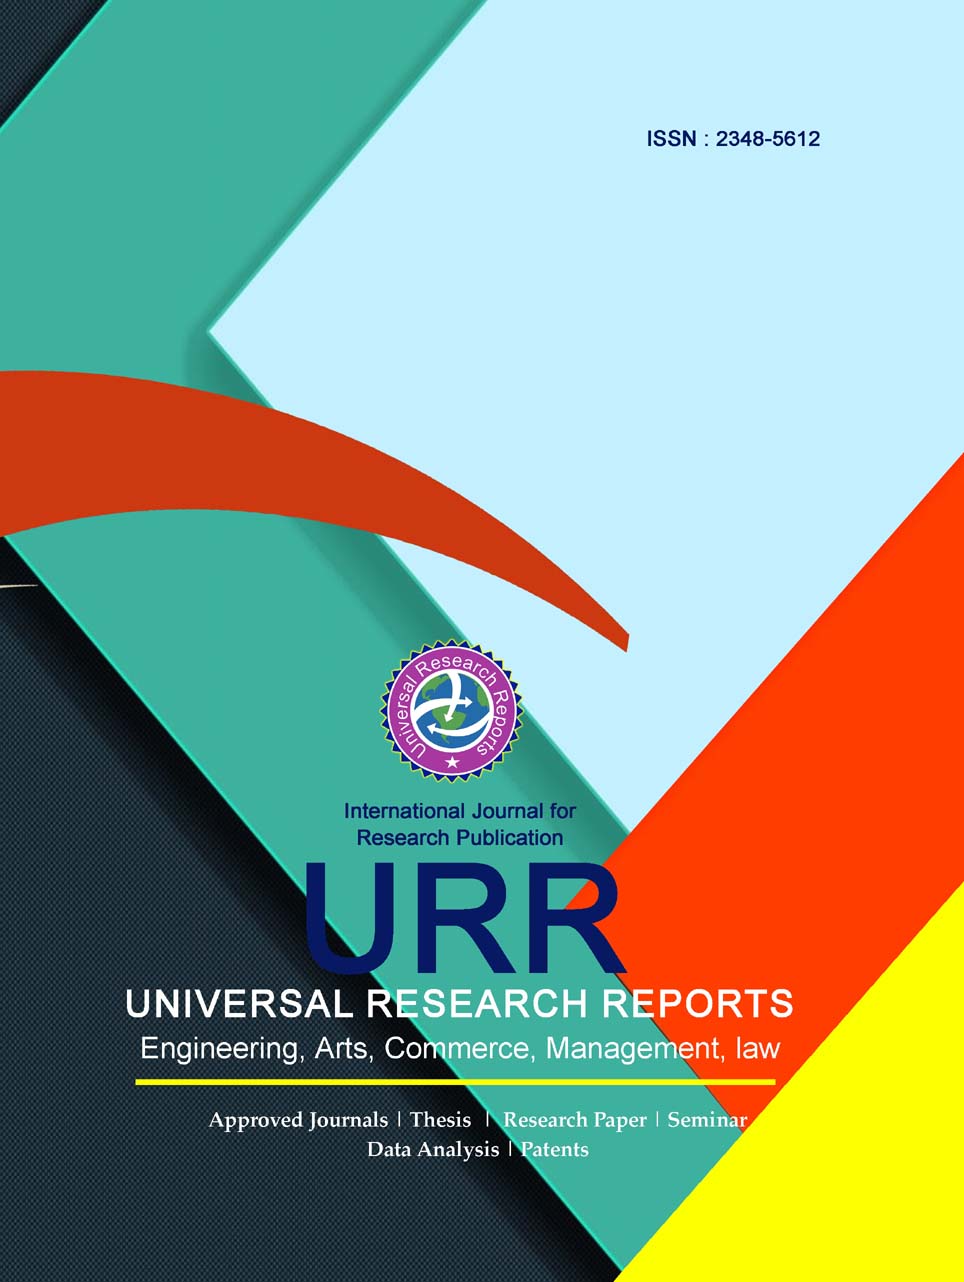 Peer Reviwed and Refereed International Research Journal